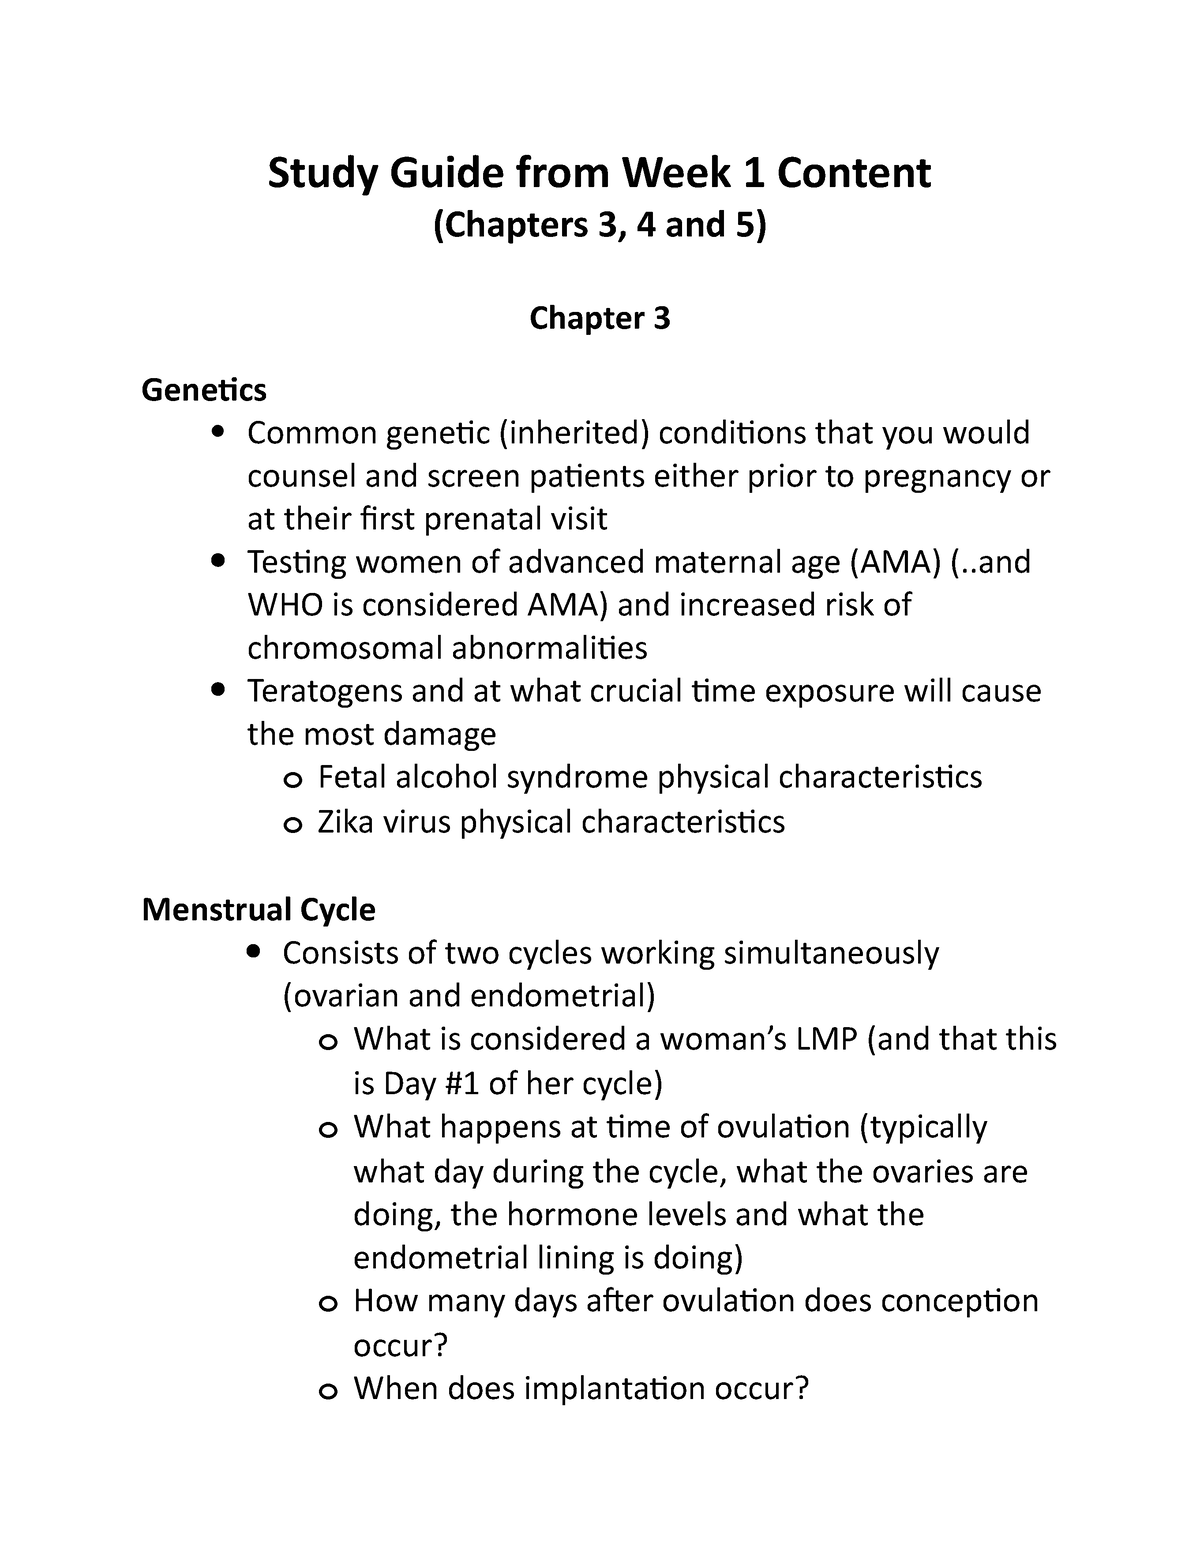 study-guide-week-1-study-guide-from-week-1-content-chapters-3-4-and-5-chapter-3-genetics